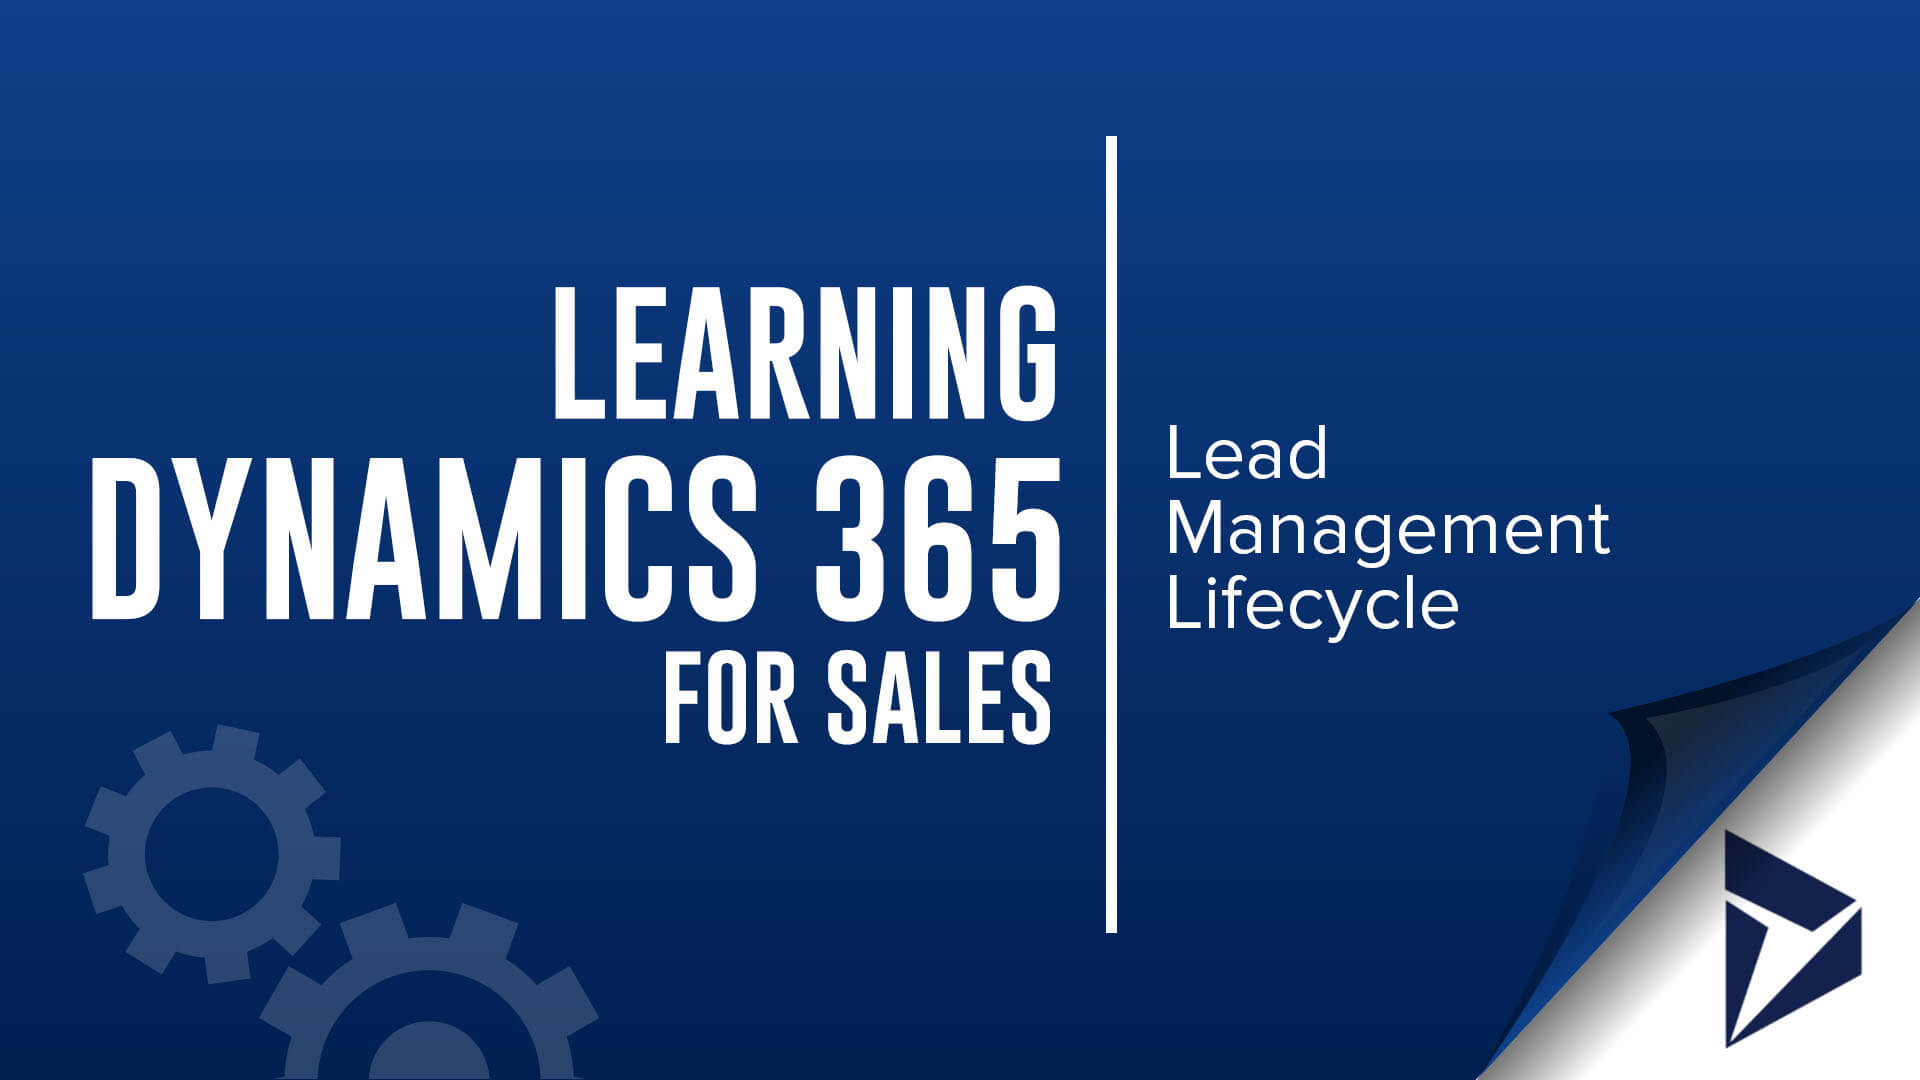 learn Dynamics 365 for Sales - lead management lifecycle